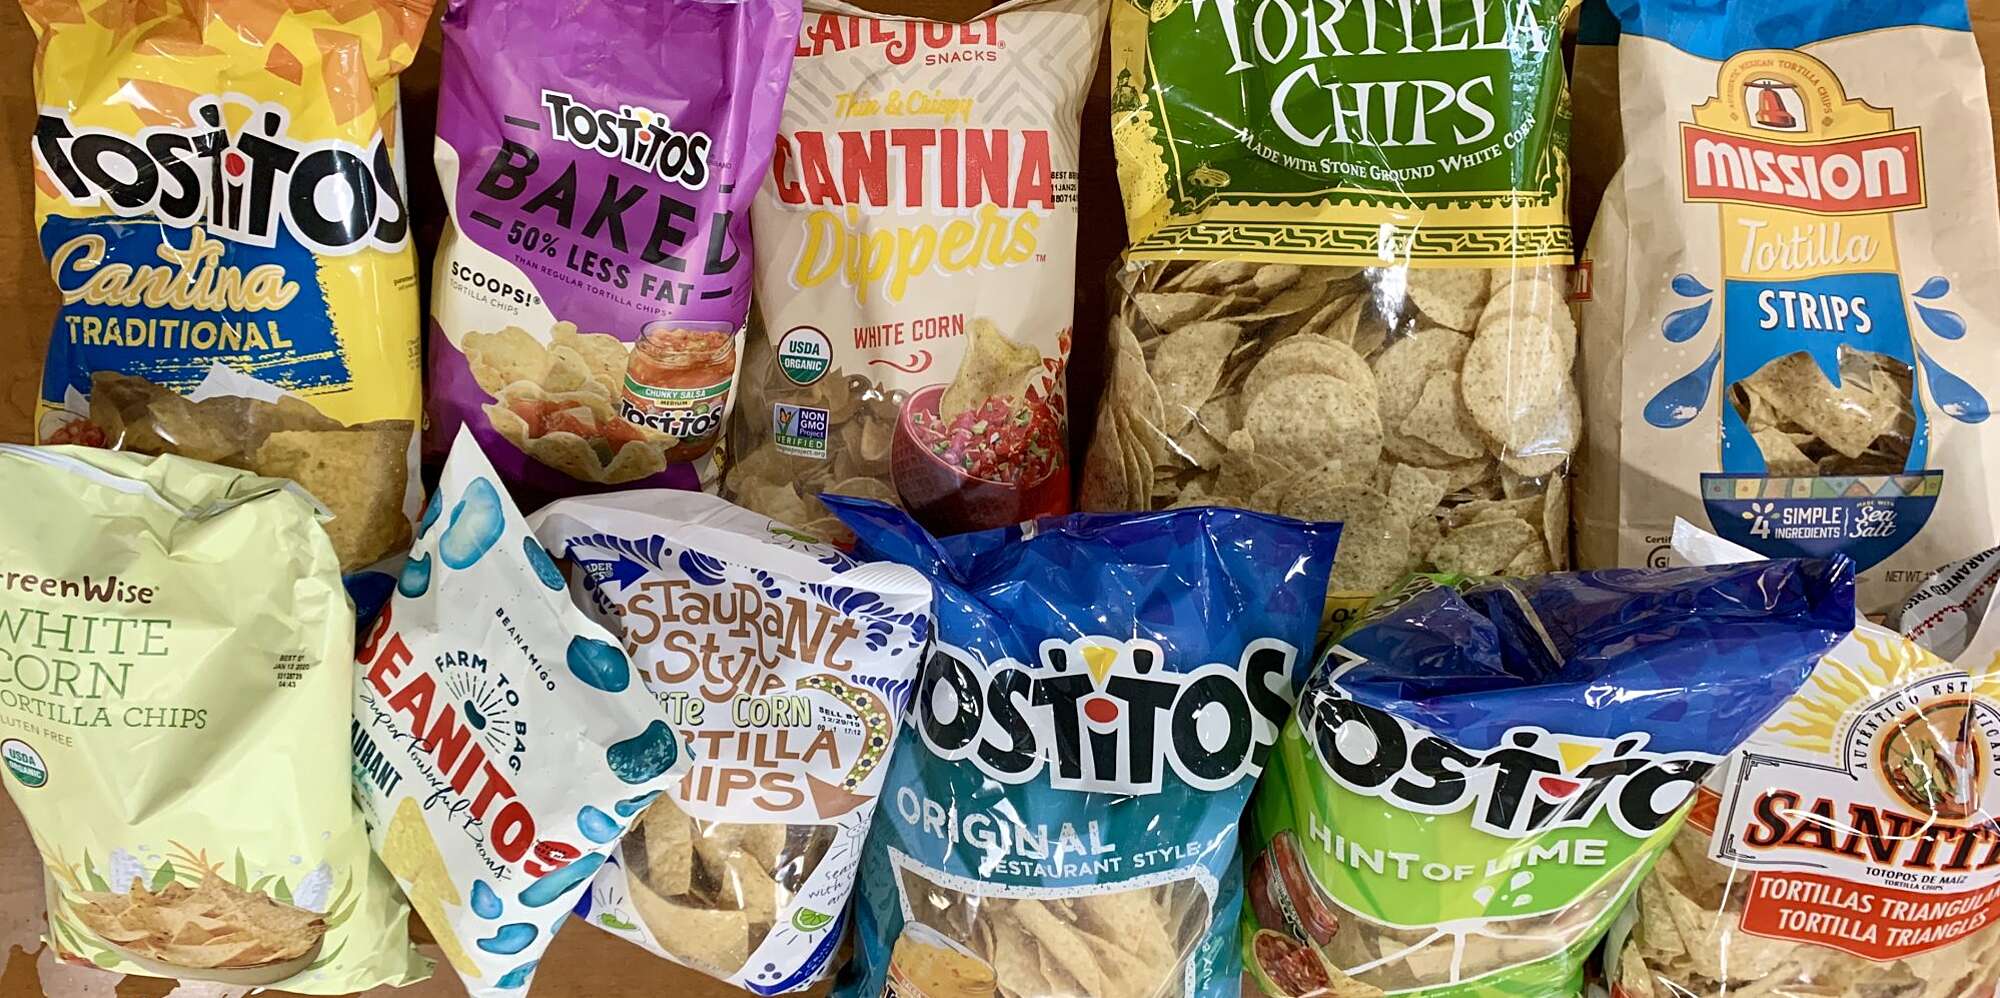 We Tried 11 Types of Tortilla Chips and This Was the Best One | MyRecipes